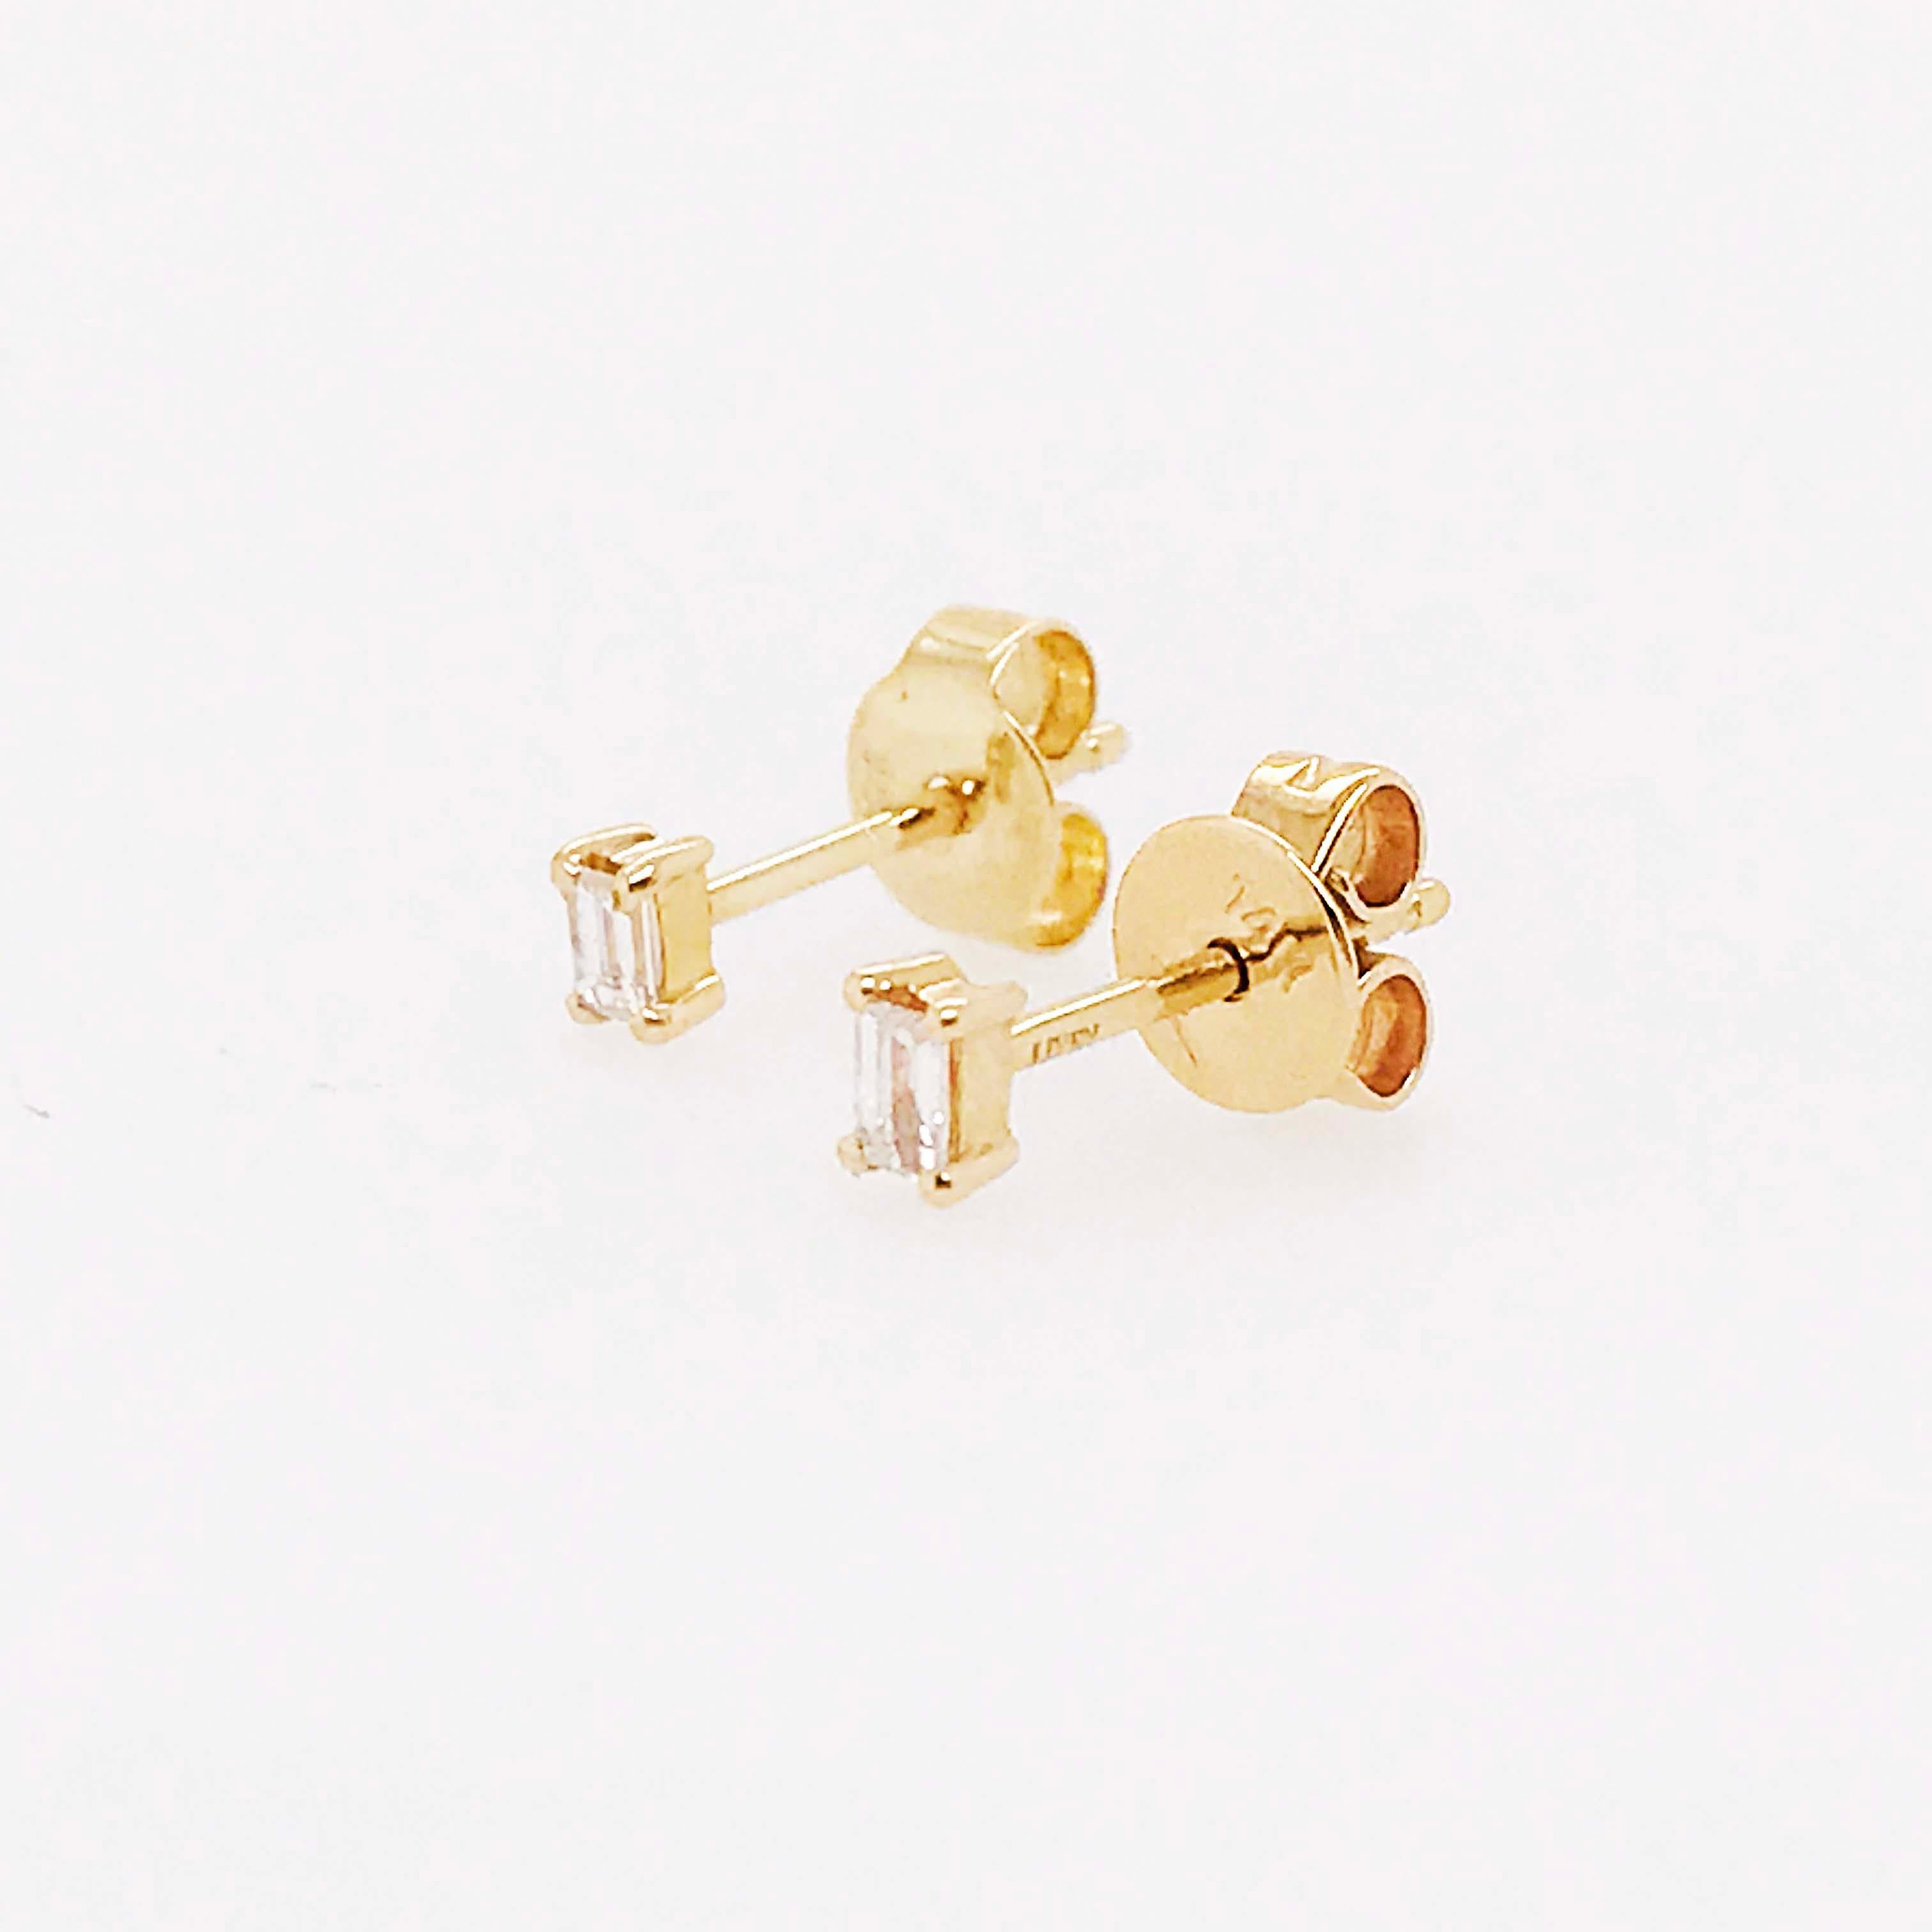 These straight baguette diamond solitaire earring studs are the perfect everyday studs! With a genuine baguette shaped diamond set in a four prong solitaire setting in the earring. The earrings are 14k yellow gold. Diamond stud earrings are a staple